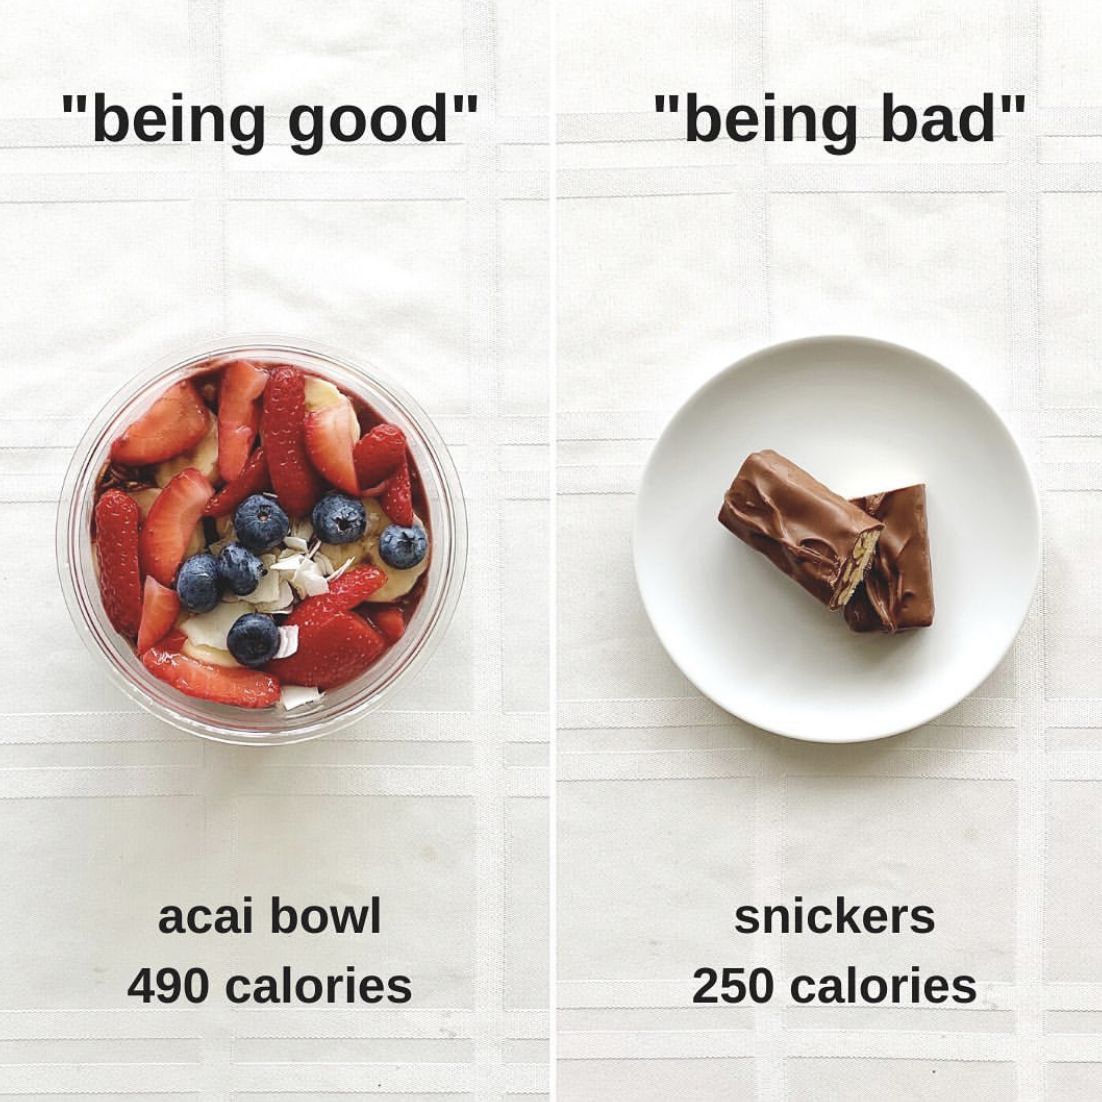 Acai Bowl or Snickers in calories